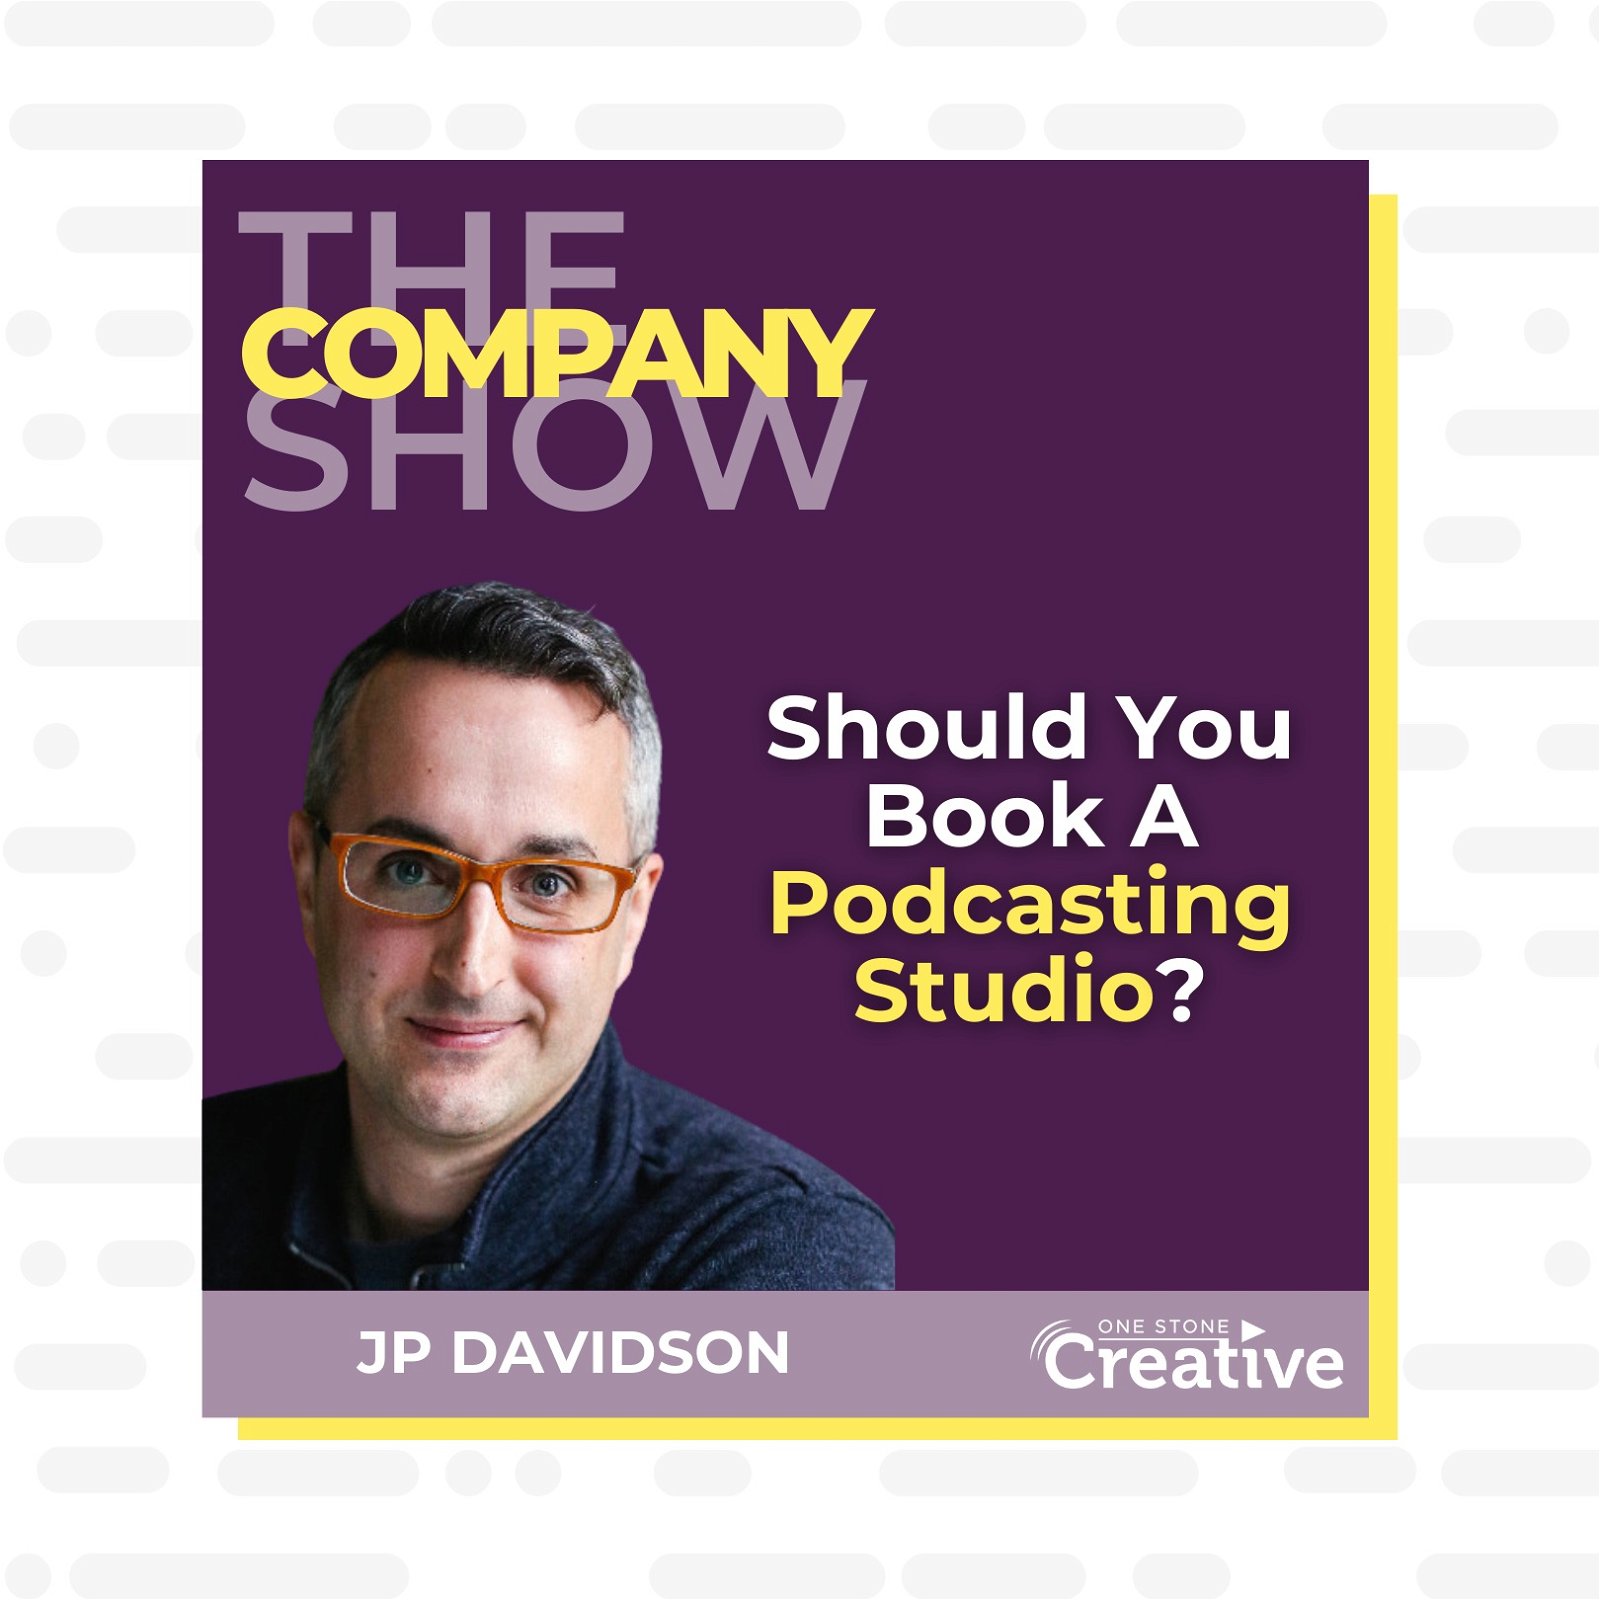 Should You Book A Podcasting Studio? with JP Davidson